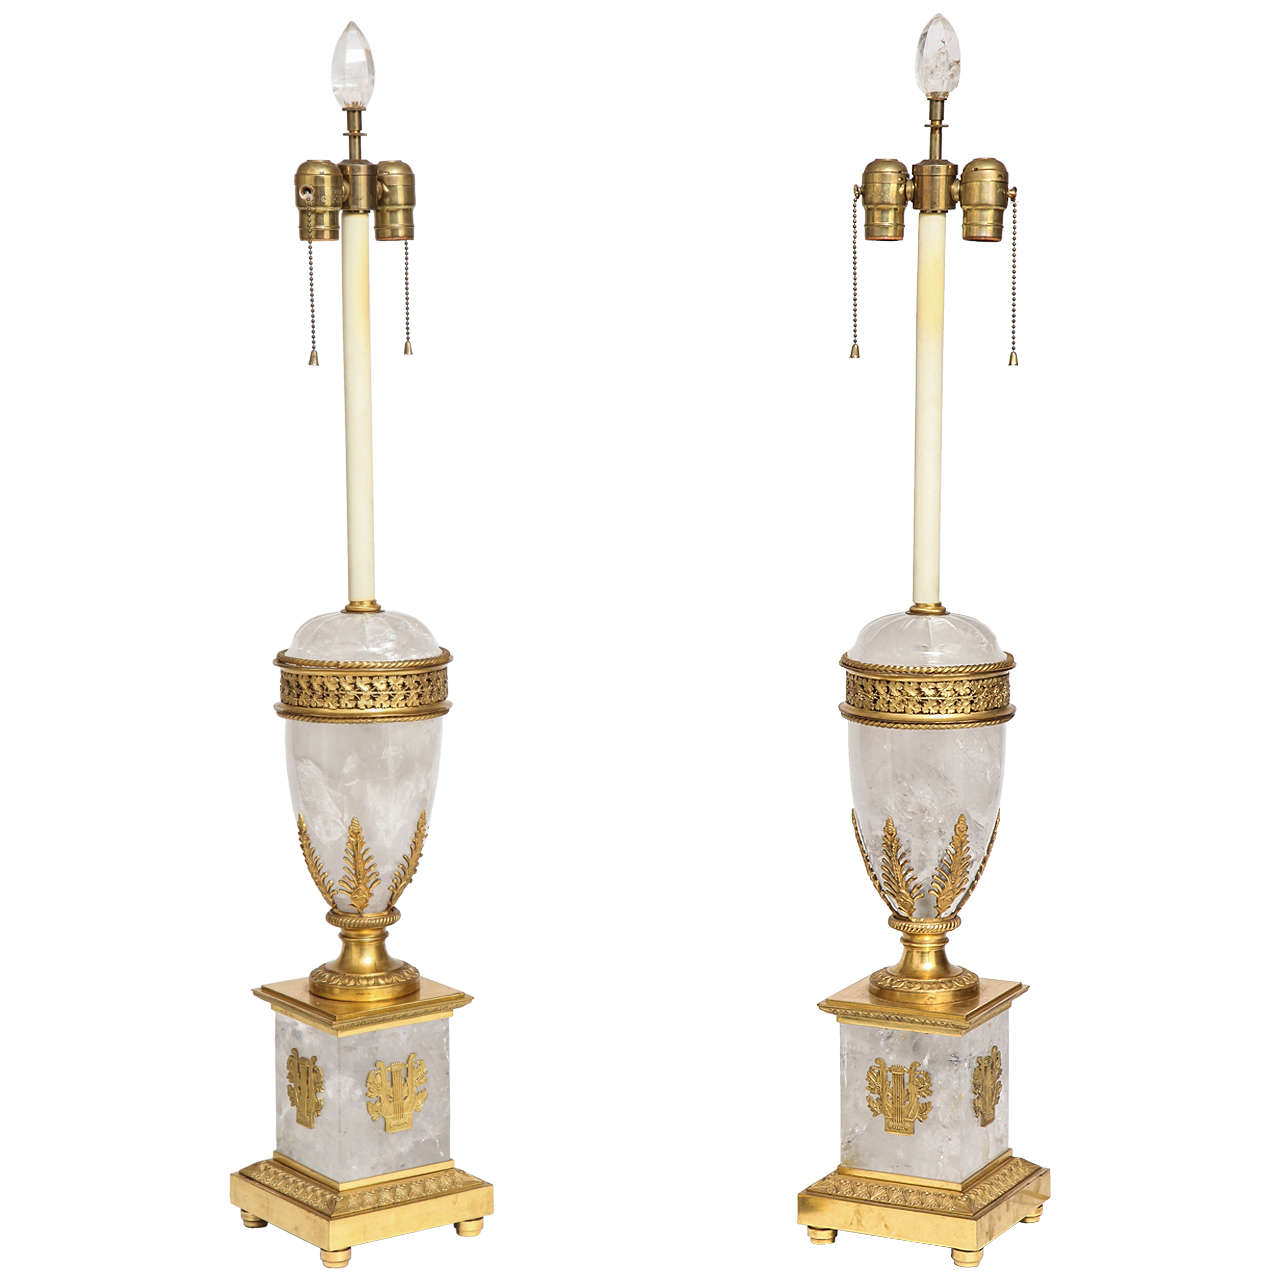 Pair of Antique French Neoclassical Rock Crystal and Ormolu Lamps For Sale